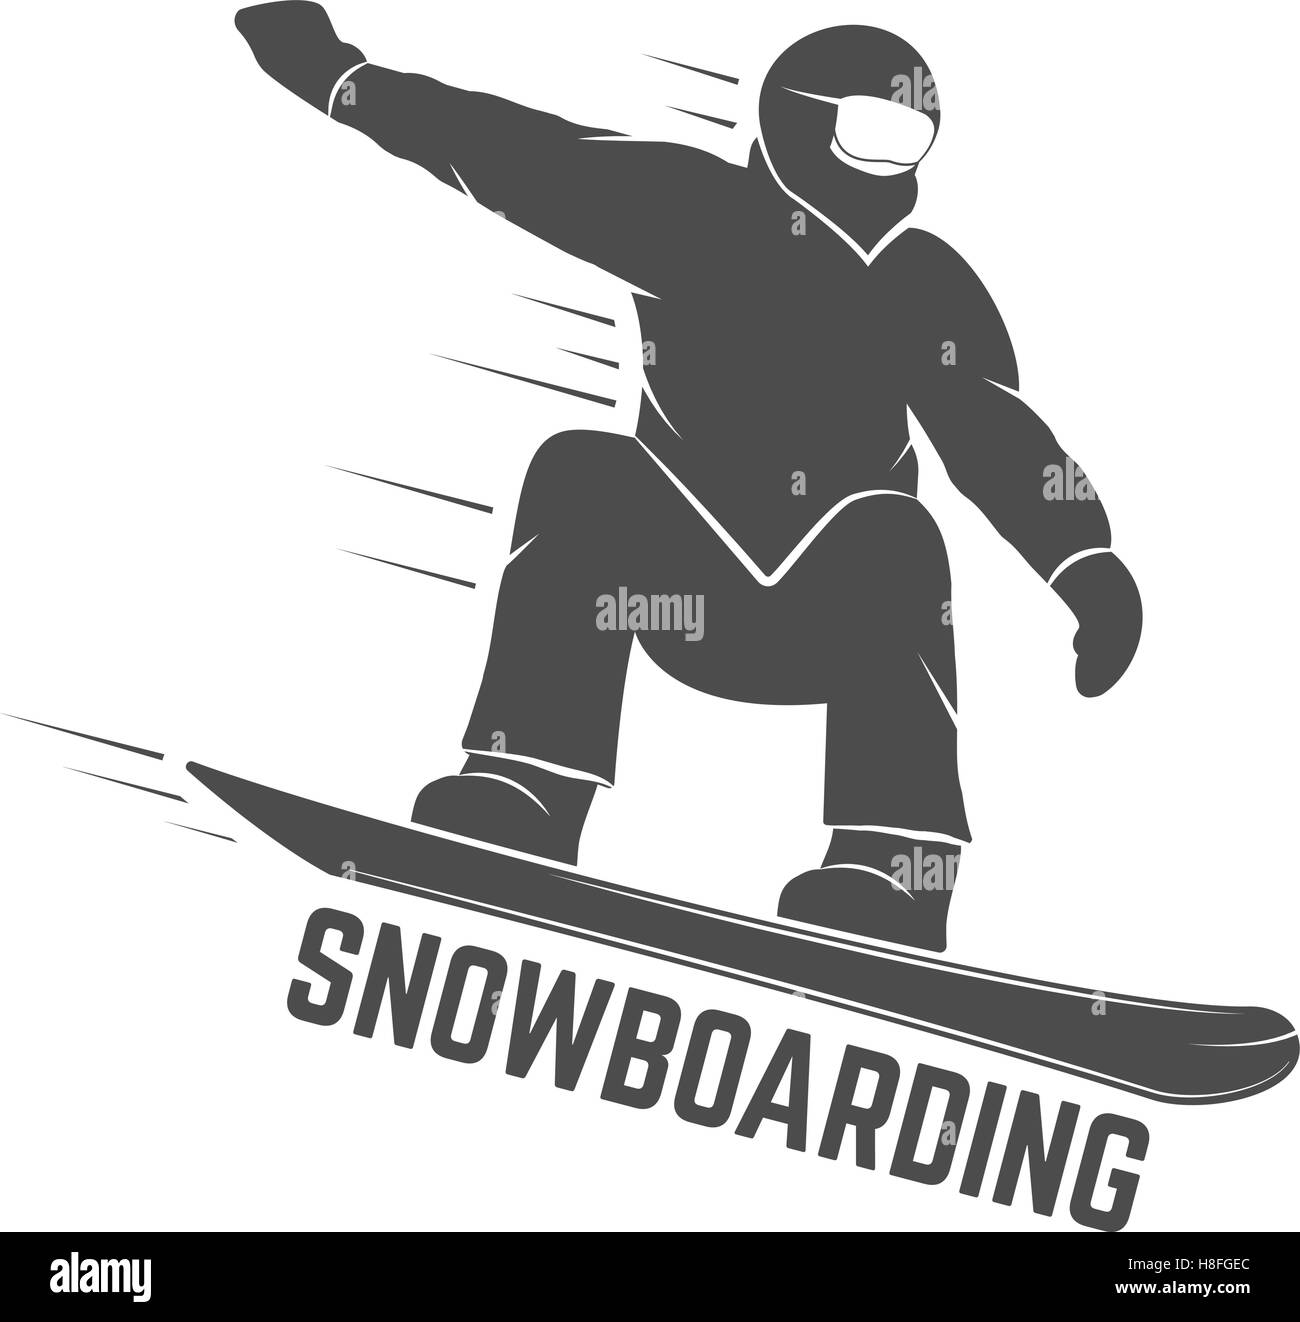 Snowboarding logo, label template. Winter sport badge. Extreme Emblem and icon. Adventure insignia. Vector monochrome design. Isolated on white background. Stock Vector